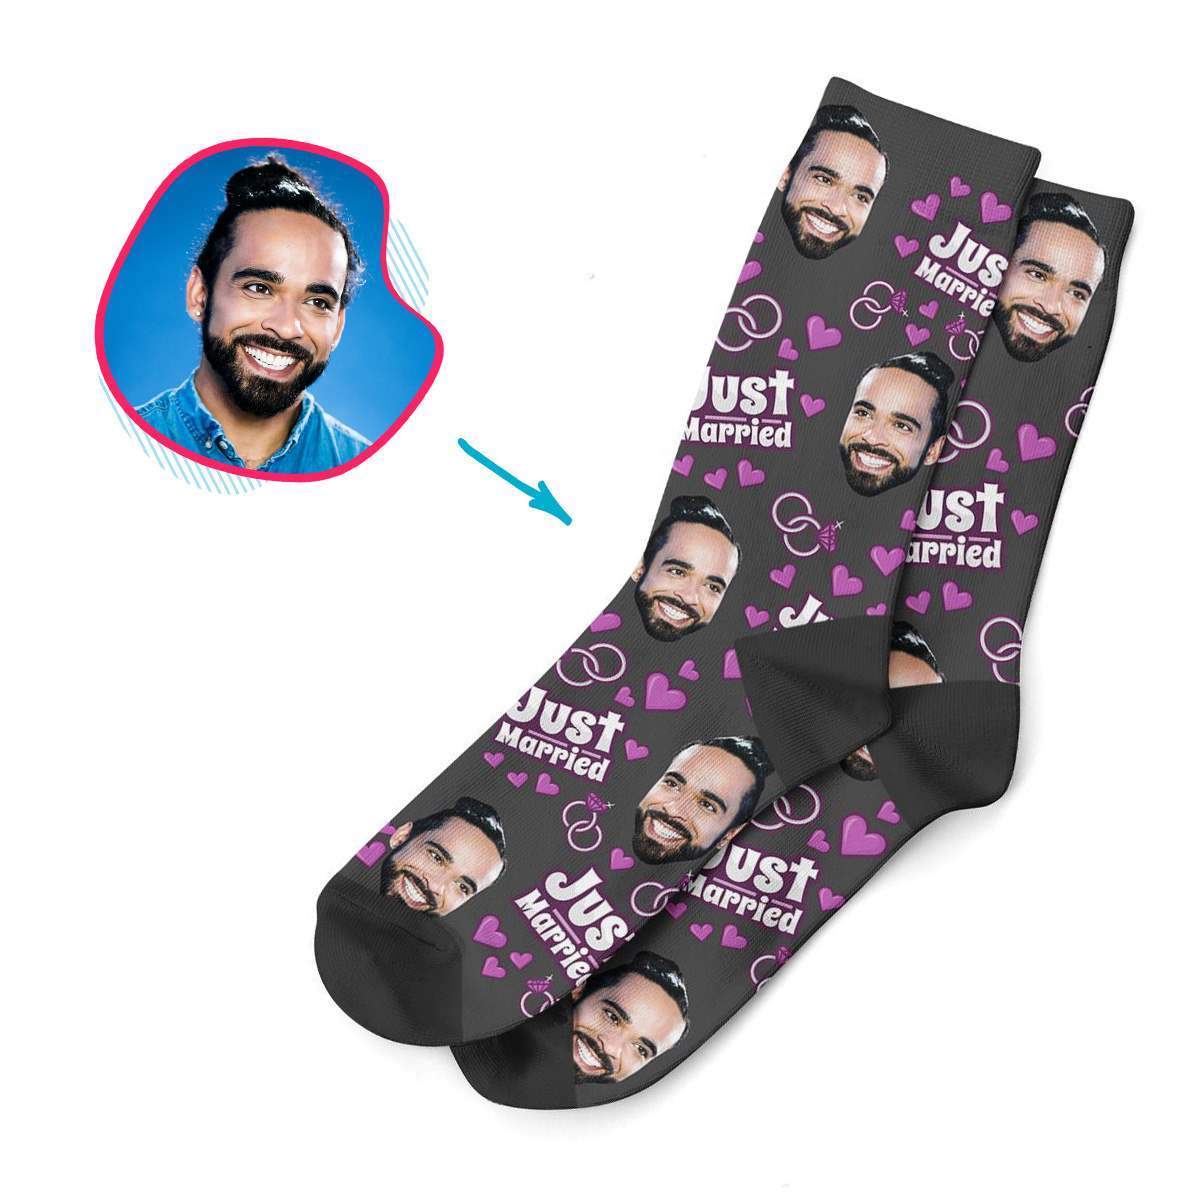 dark Just Married socks personalized with photo of face printed on them